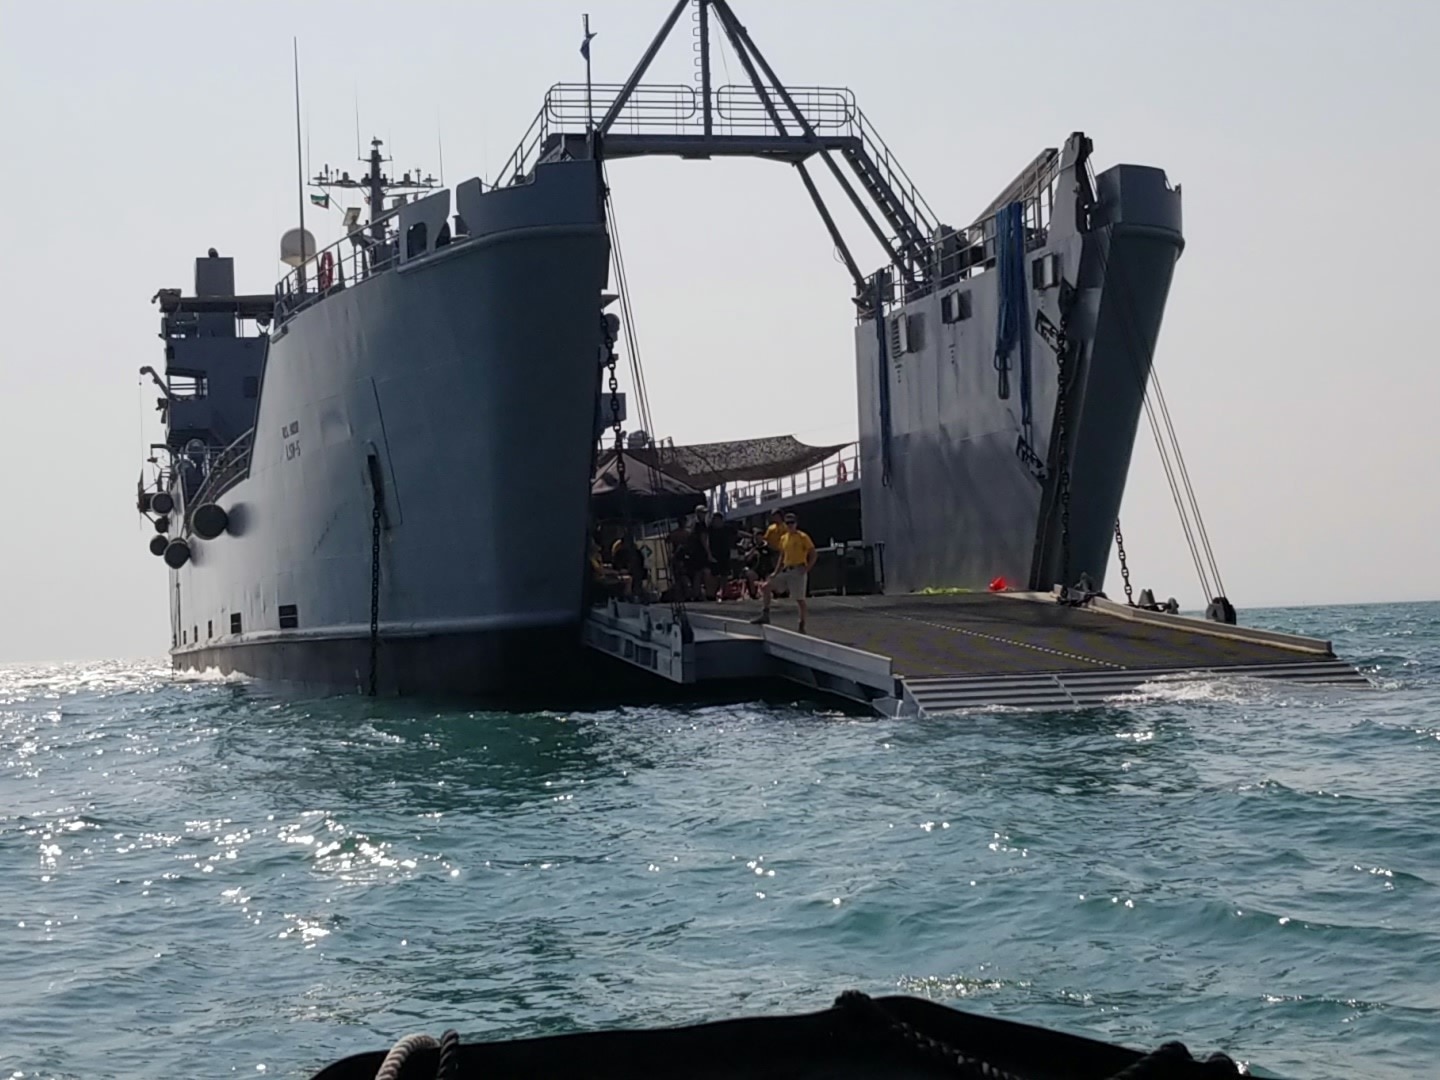 Members of the 511th Engineer Dive Detachment prepare to receive additional divers approaching from the front ramp of the U.S. Army Logistic Support Vessel 5 (LSV-5) near Kuwait Naval Base, Kuwait, Oct. 23, 2019. The vessel at the time was hosting joint training between U.S. Amy 511th Engineer Dive Detachment and members of the Kuwait Fire and rescue Service. (U.S. Army photo by Staff Sgt. Robert Waters)